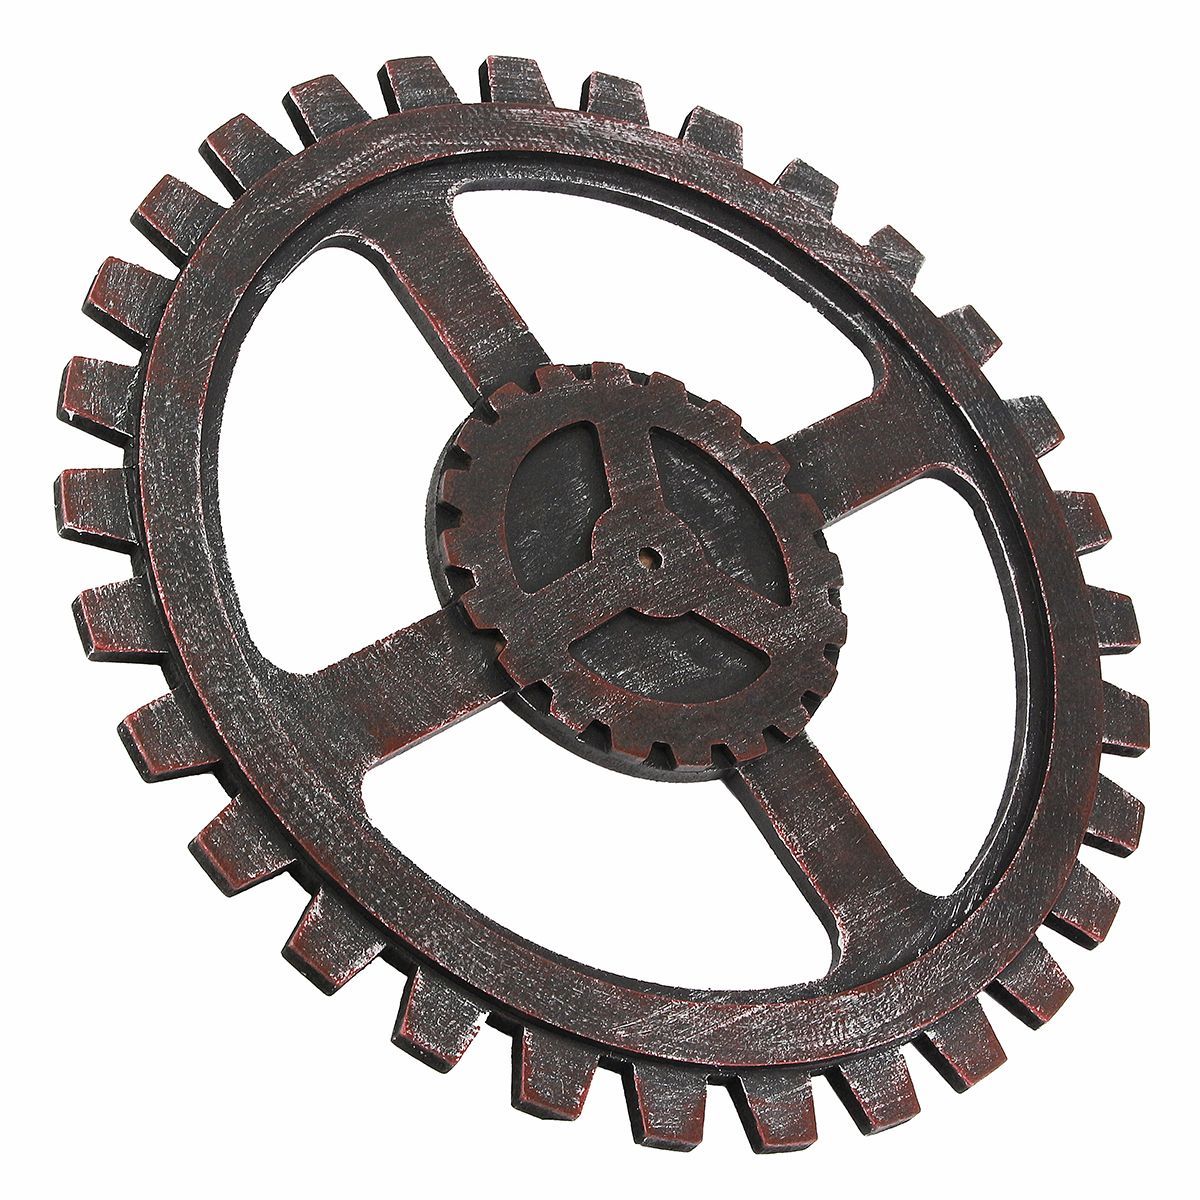 Industrial-Style-Wooden-Gear-Wall-Decor-Vintage-Home-Bar-Pub-Hanging-Decor-40cm-1163959